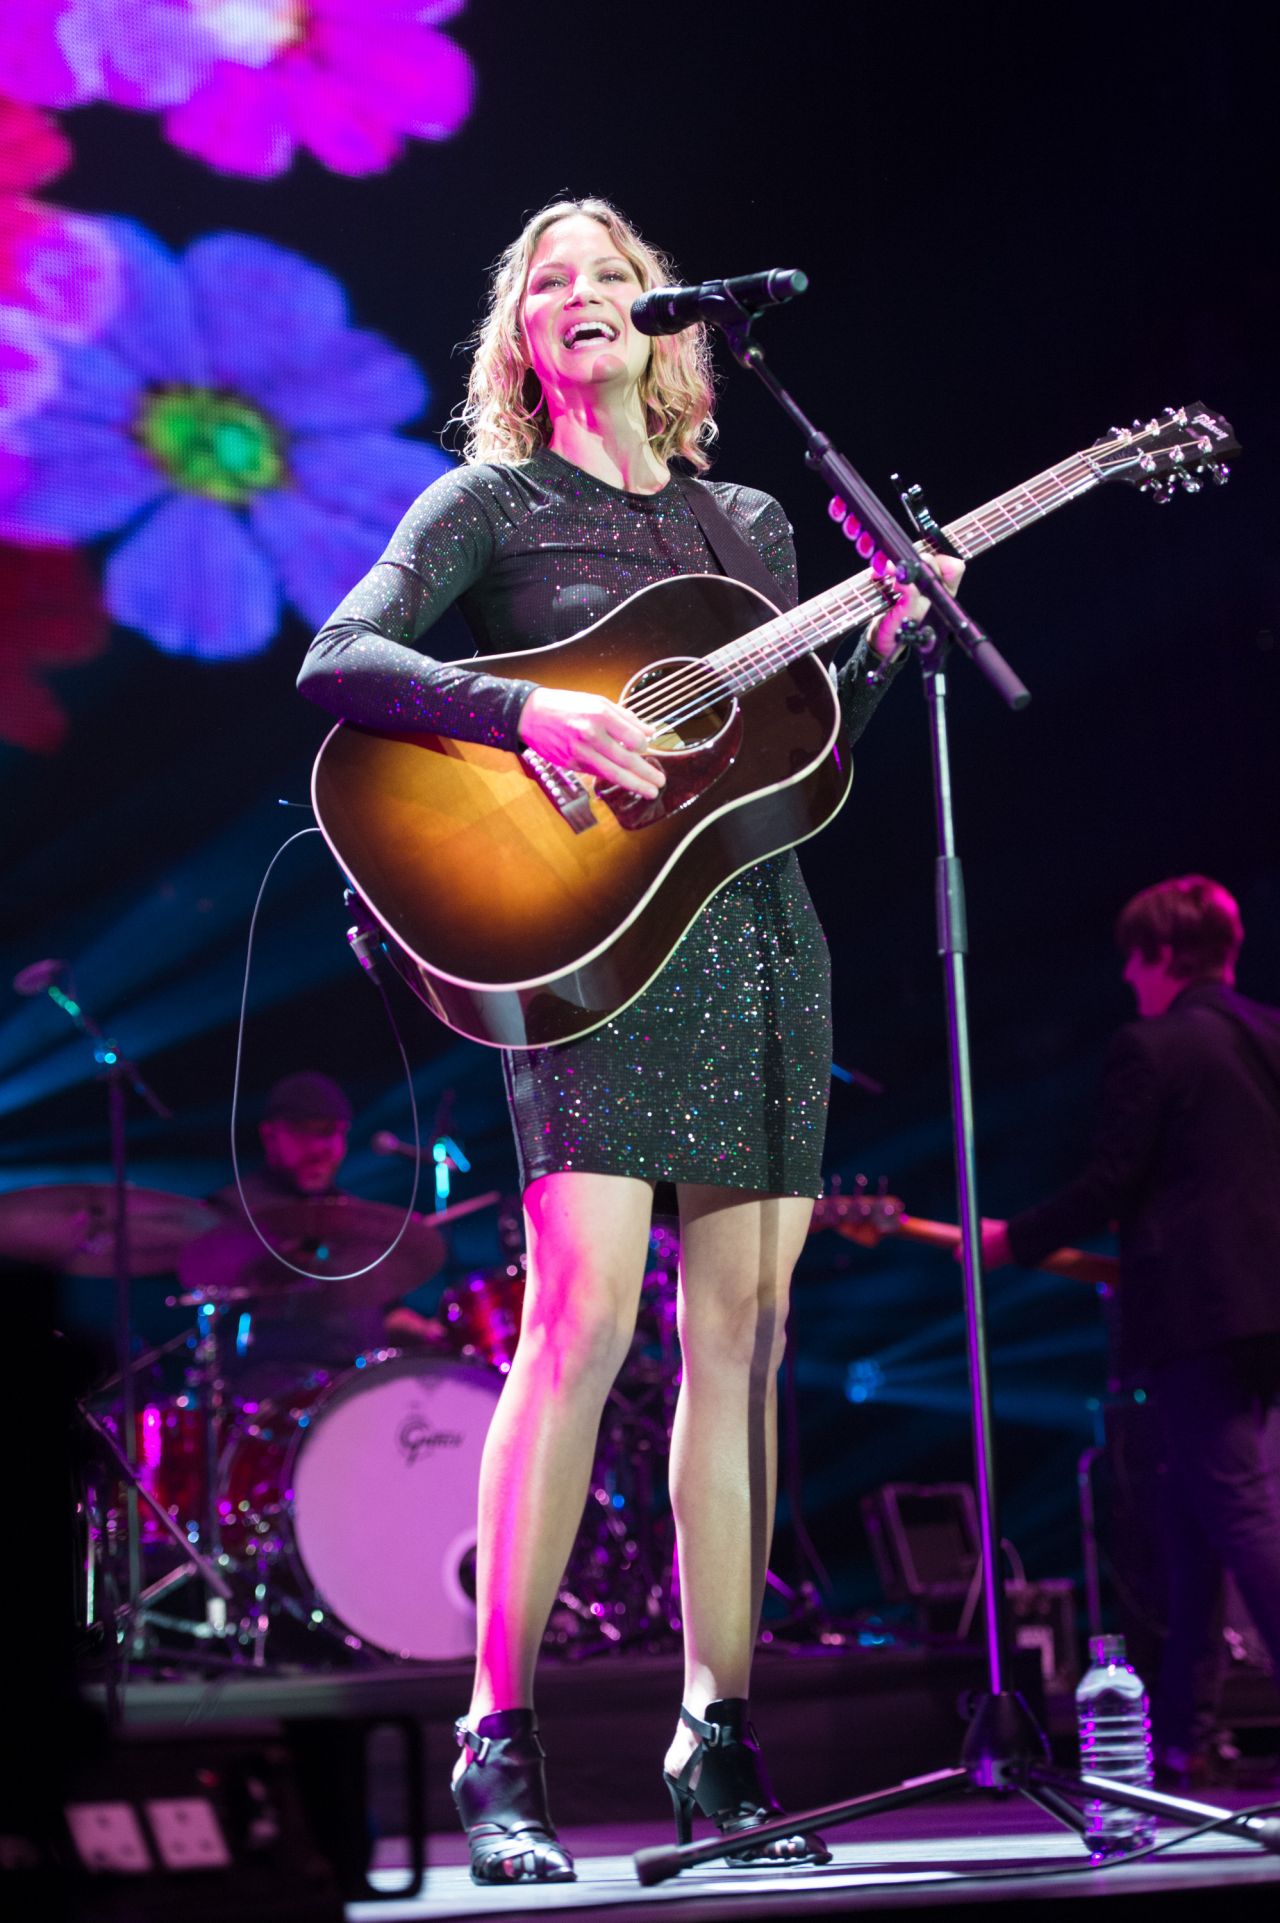 Jennifer Nettles Performs at C2C Country Music Festival in London 3/10/ 20171280 x 1923